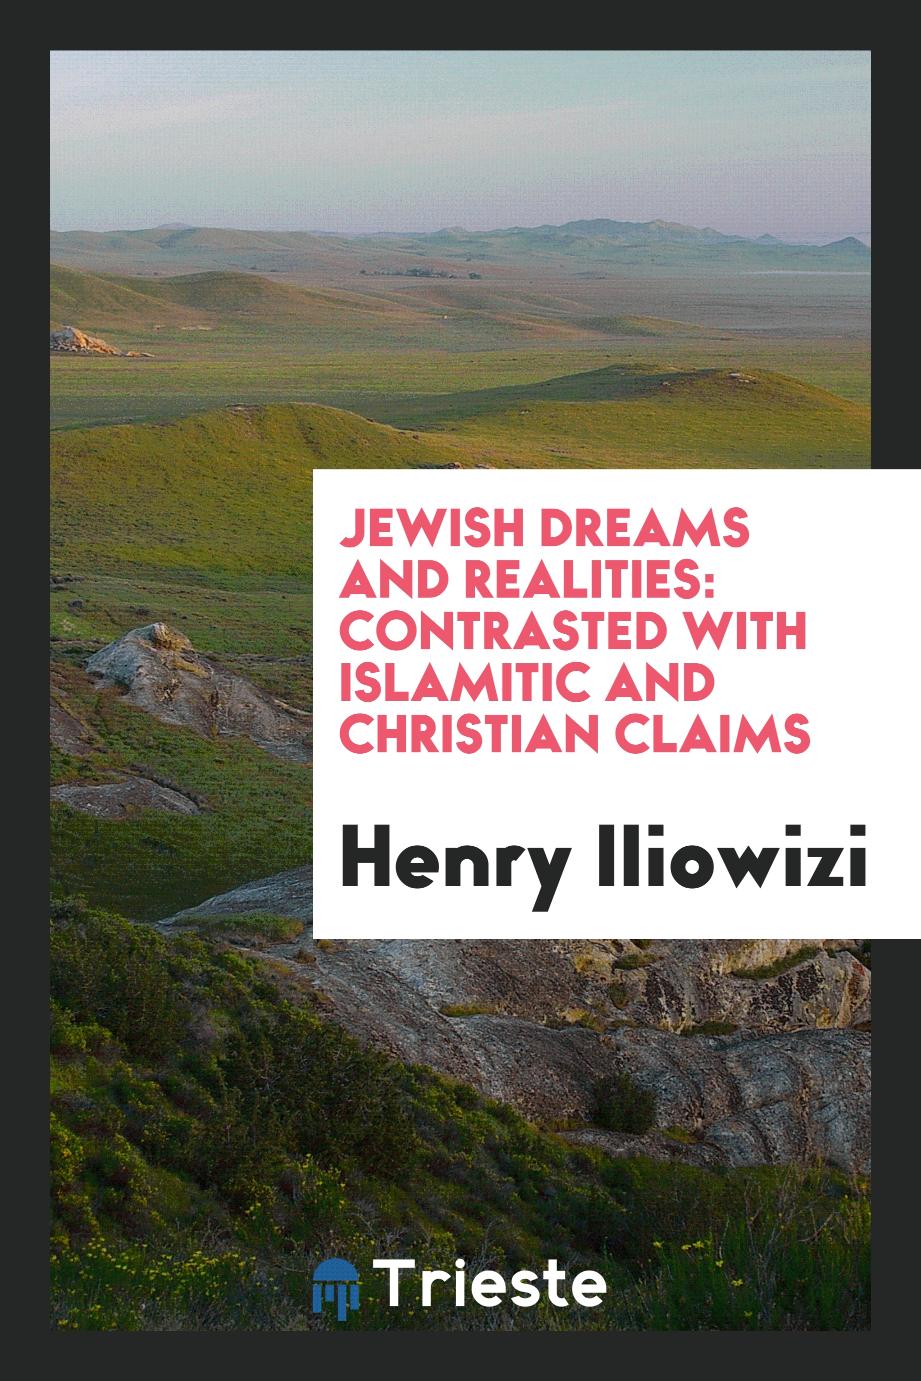 Jewish dreams and realities: contrasted with Islamitic and Christian claims